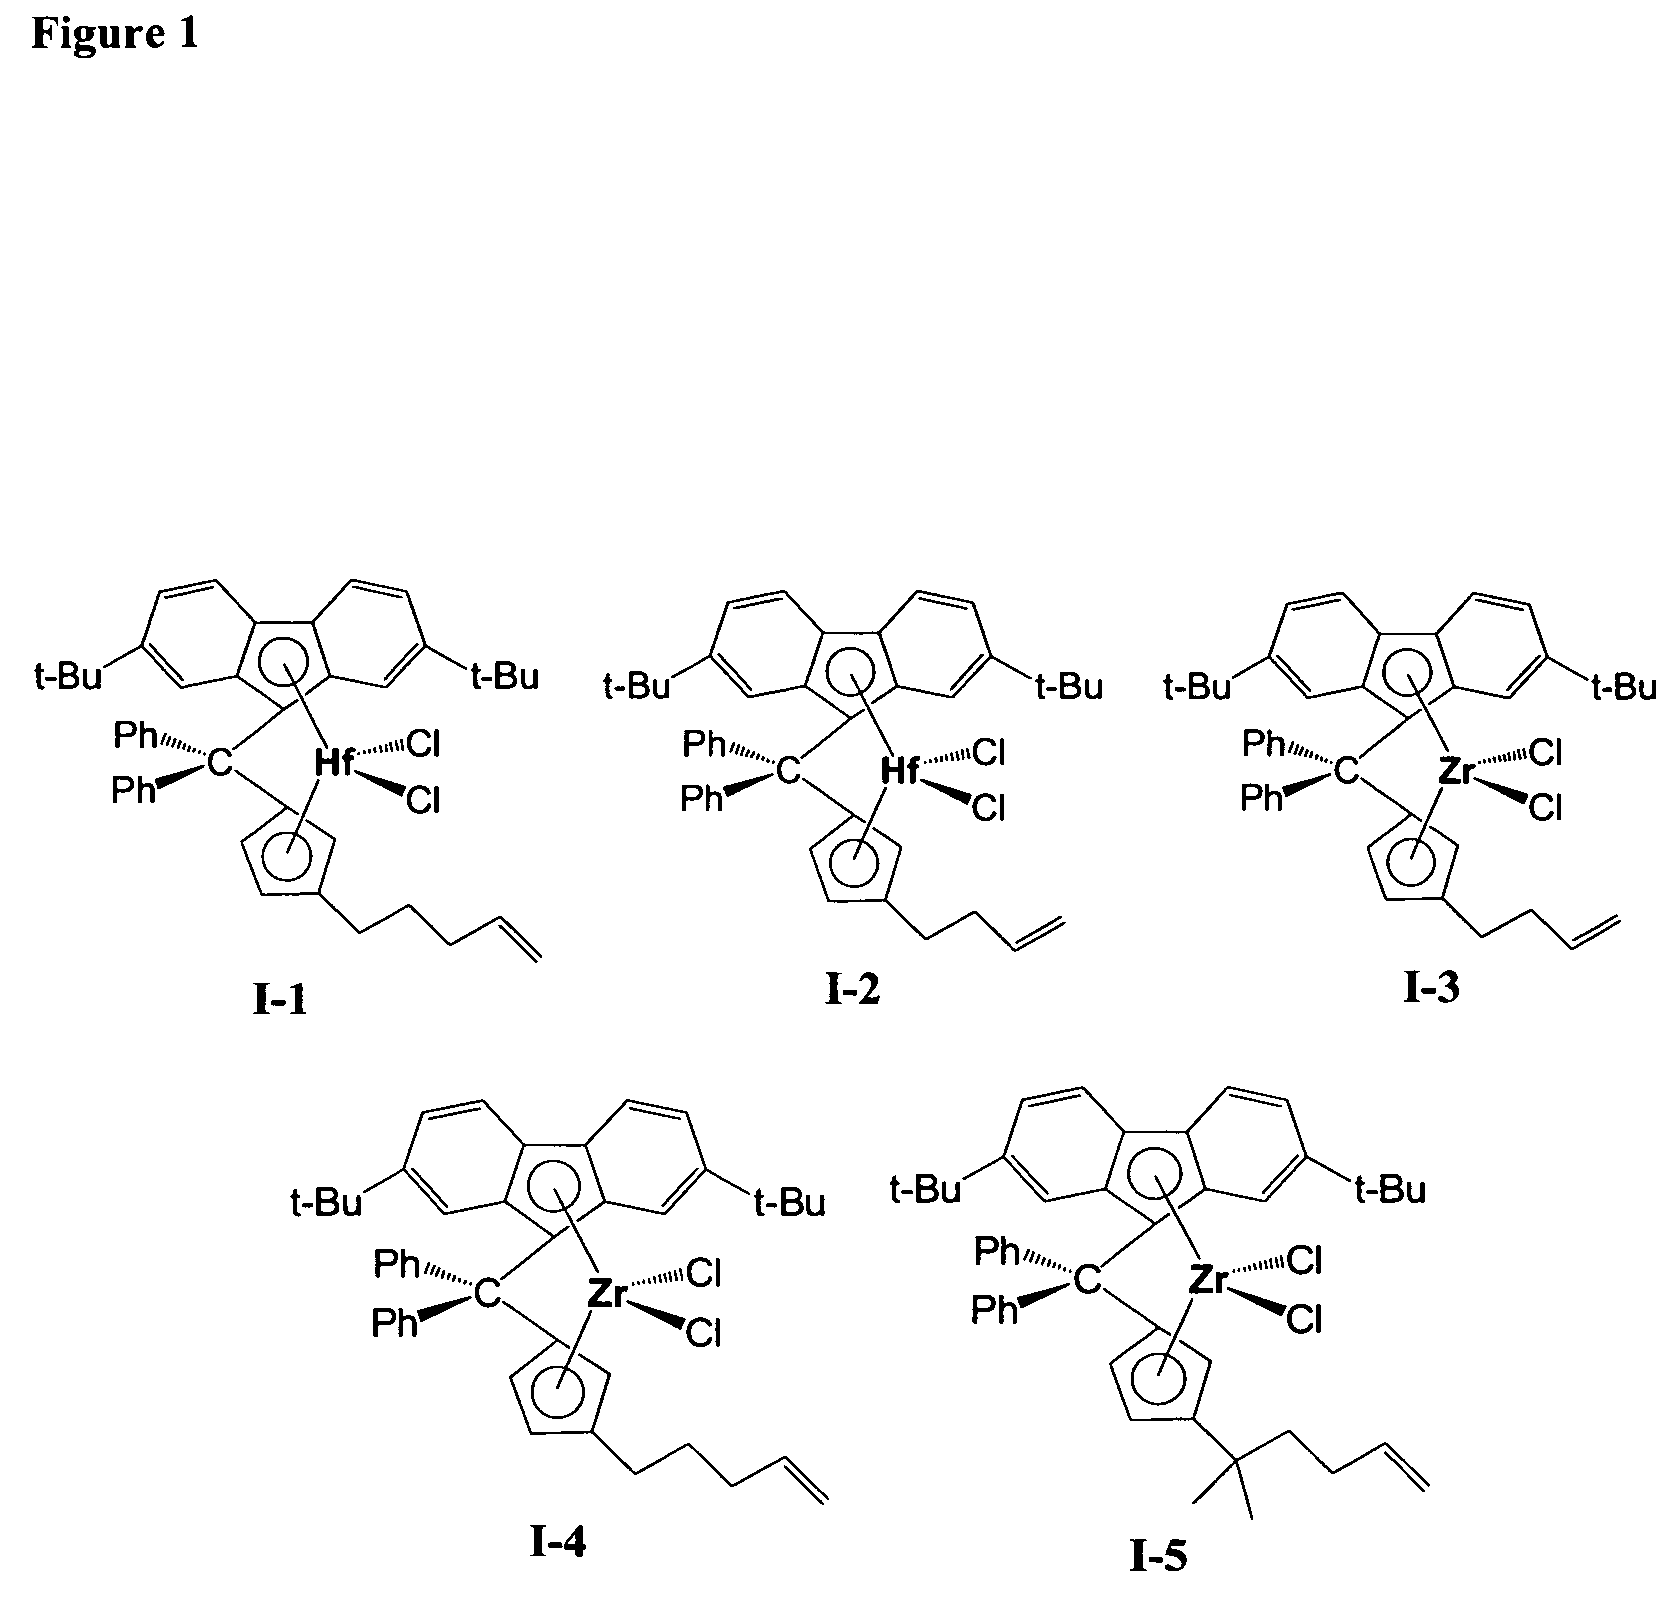 Polymerization catalysts for producing high molecular weight polymers with low levels of long chain branching